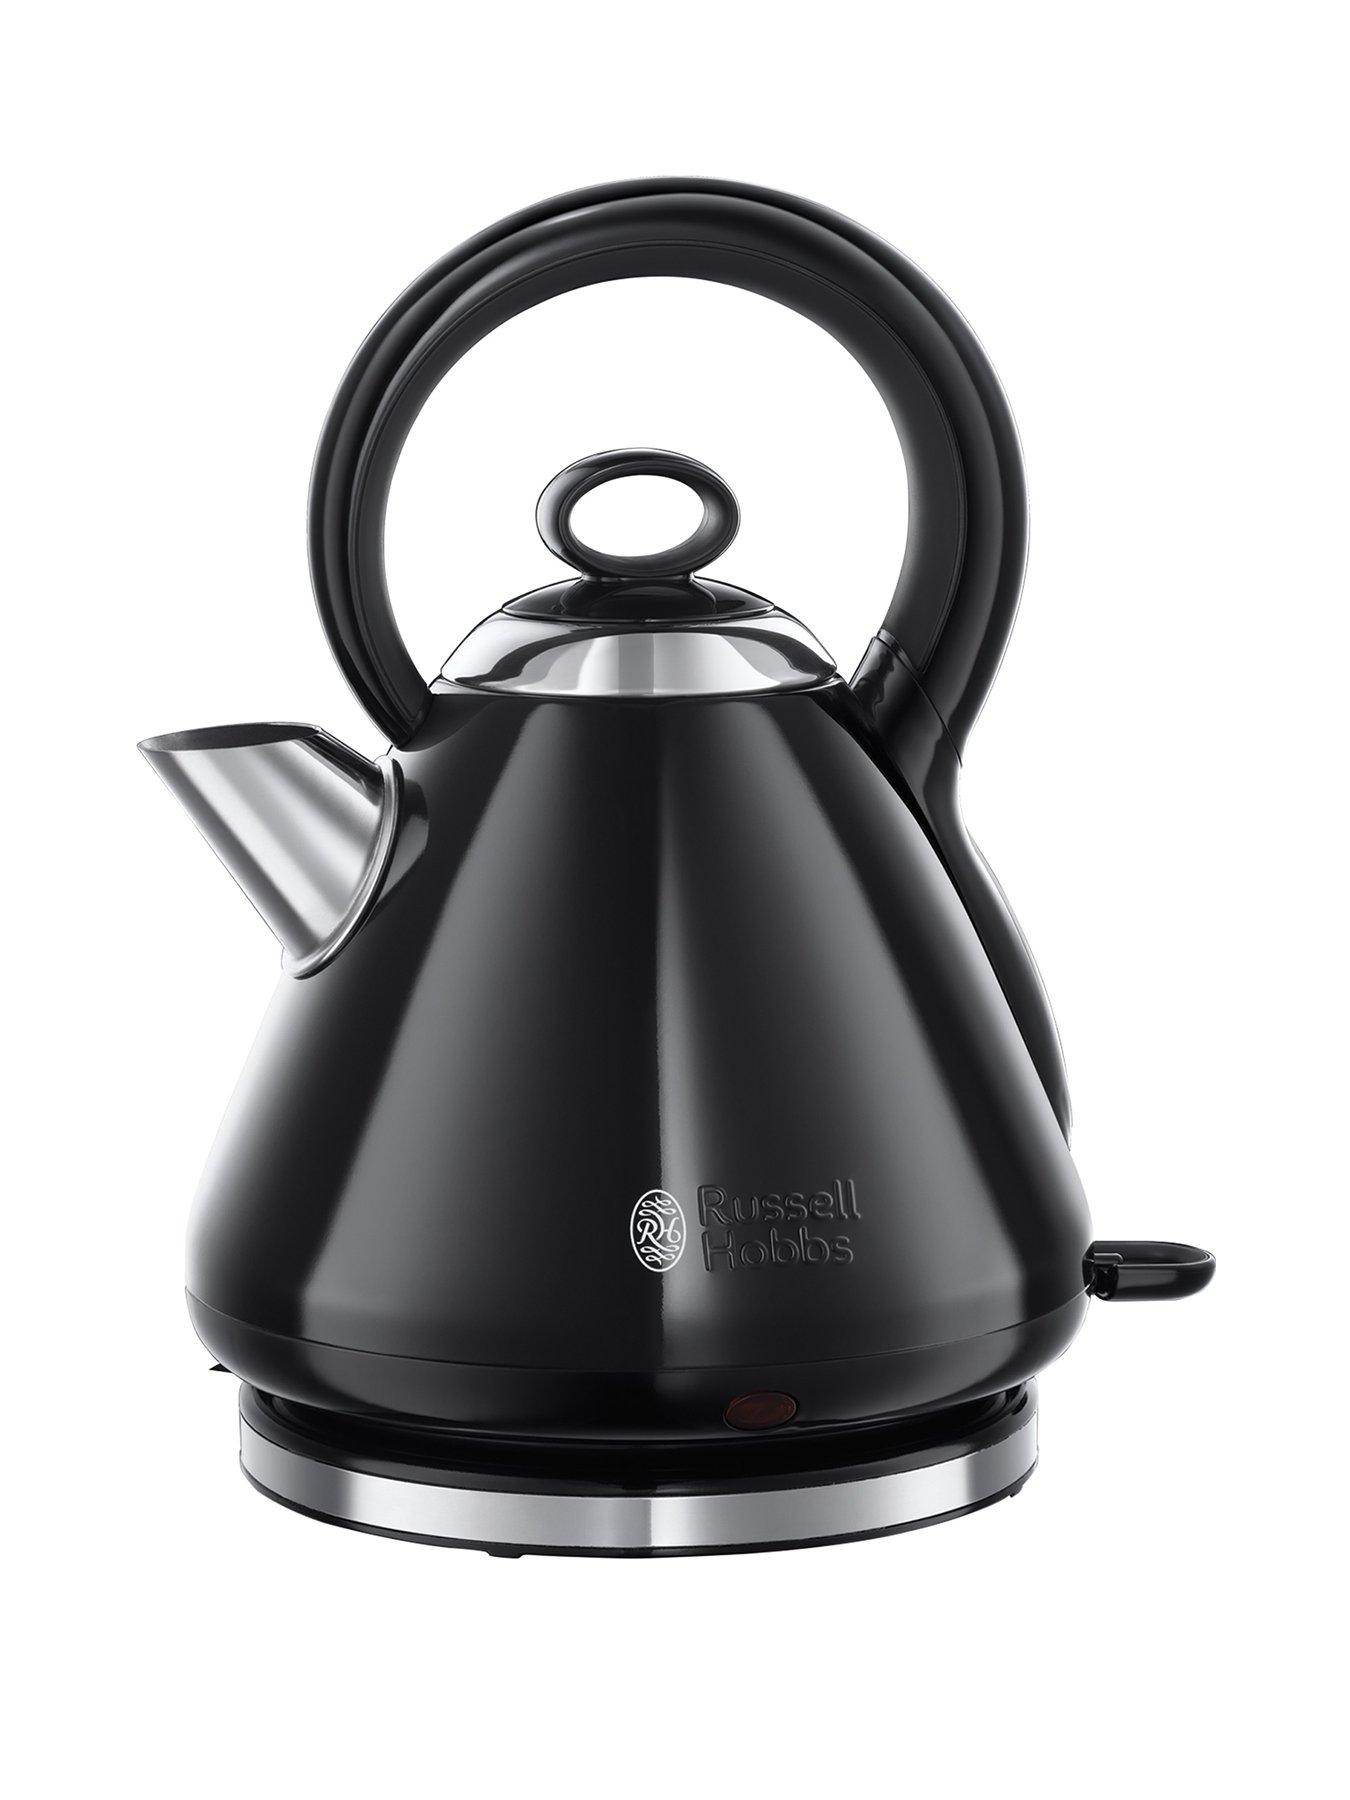 1.7 Litre Russell Hobbs Dorchester Kettle Black 3000 W with 18782 2-Slice Toaster 